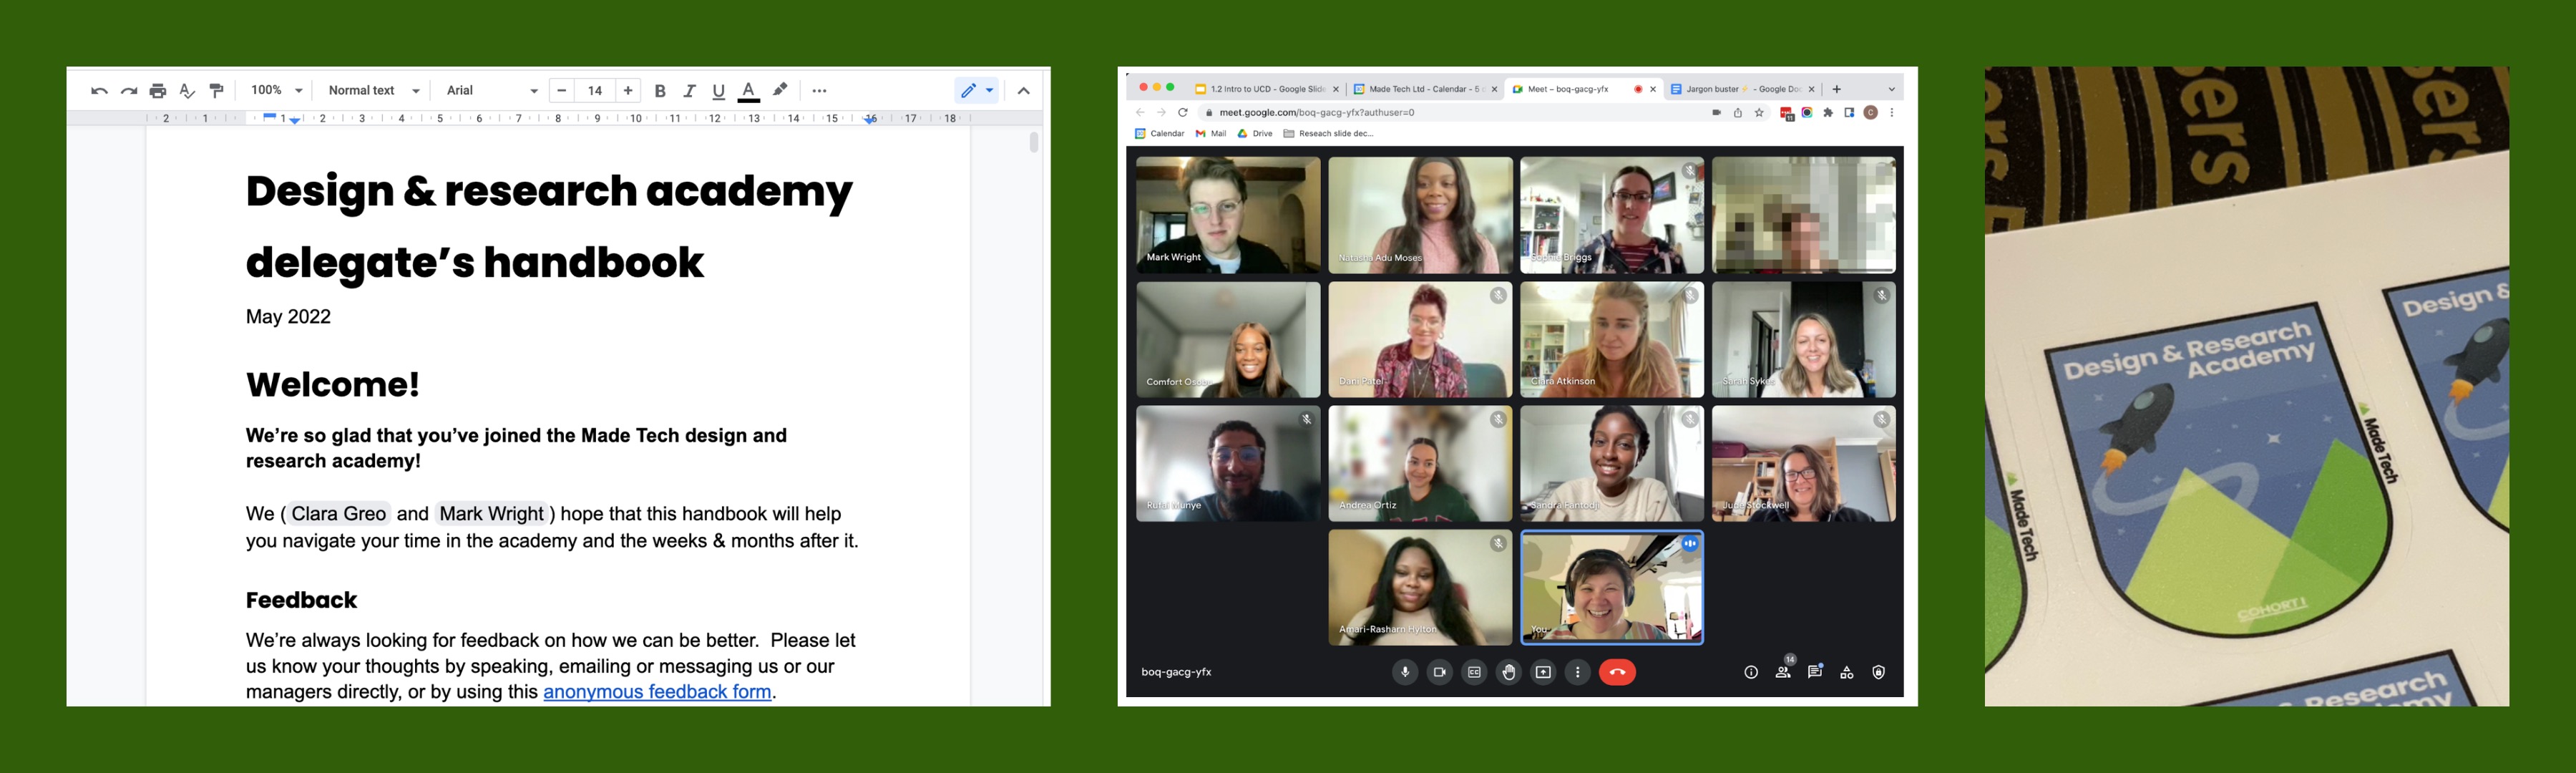 Three images. The first a screenshot of a google doc titled "Design and Research academy Delegates Handbook" and the subtitle is "Welcome!". The next image is a screenshot of a google hangout with 12 smiling faces. The last image is a photo of a sheet of stickers. The stickers say "Design and research academy" and there is a rocket and some green mountains.